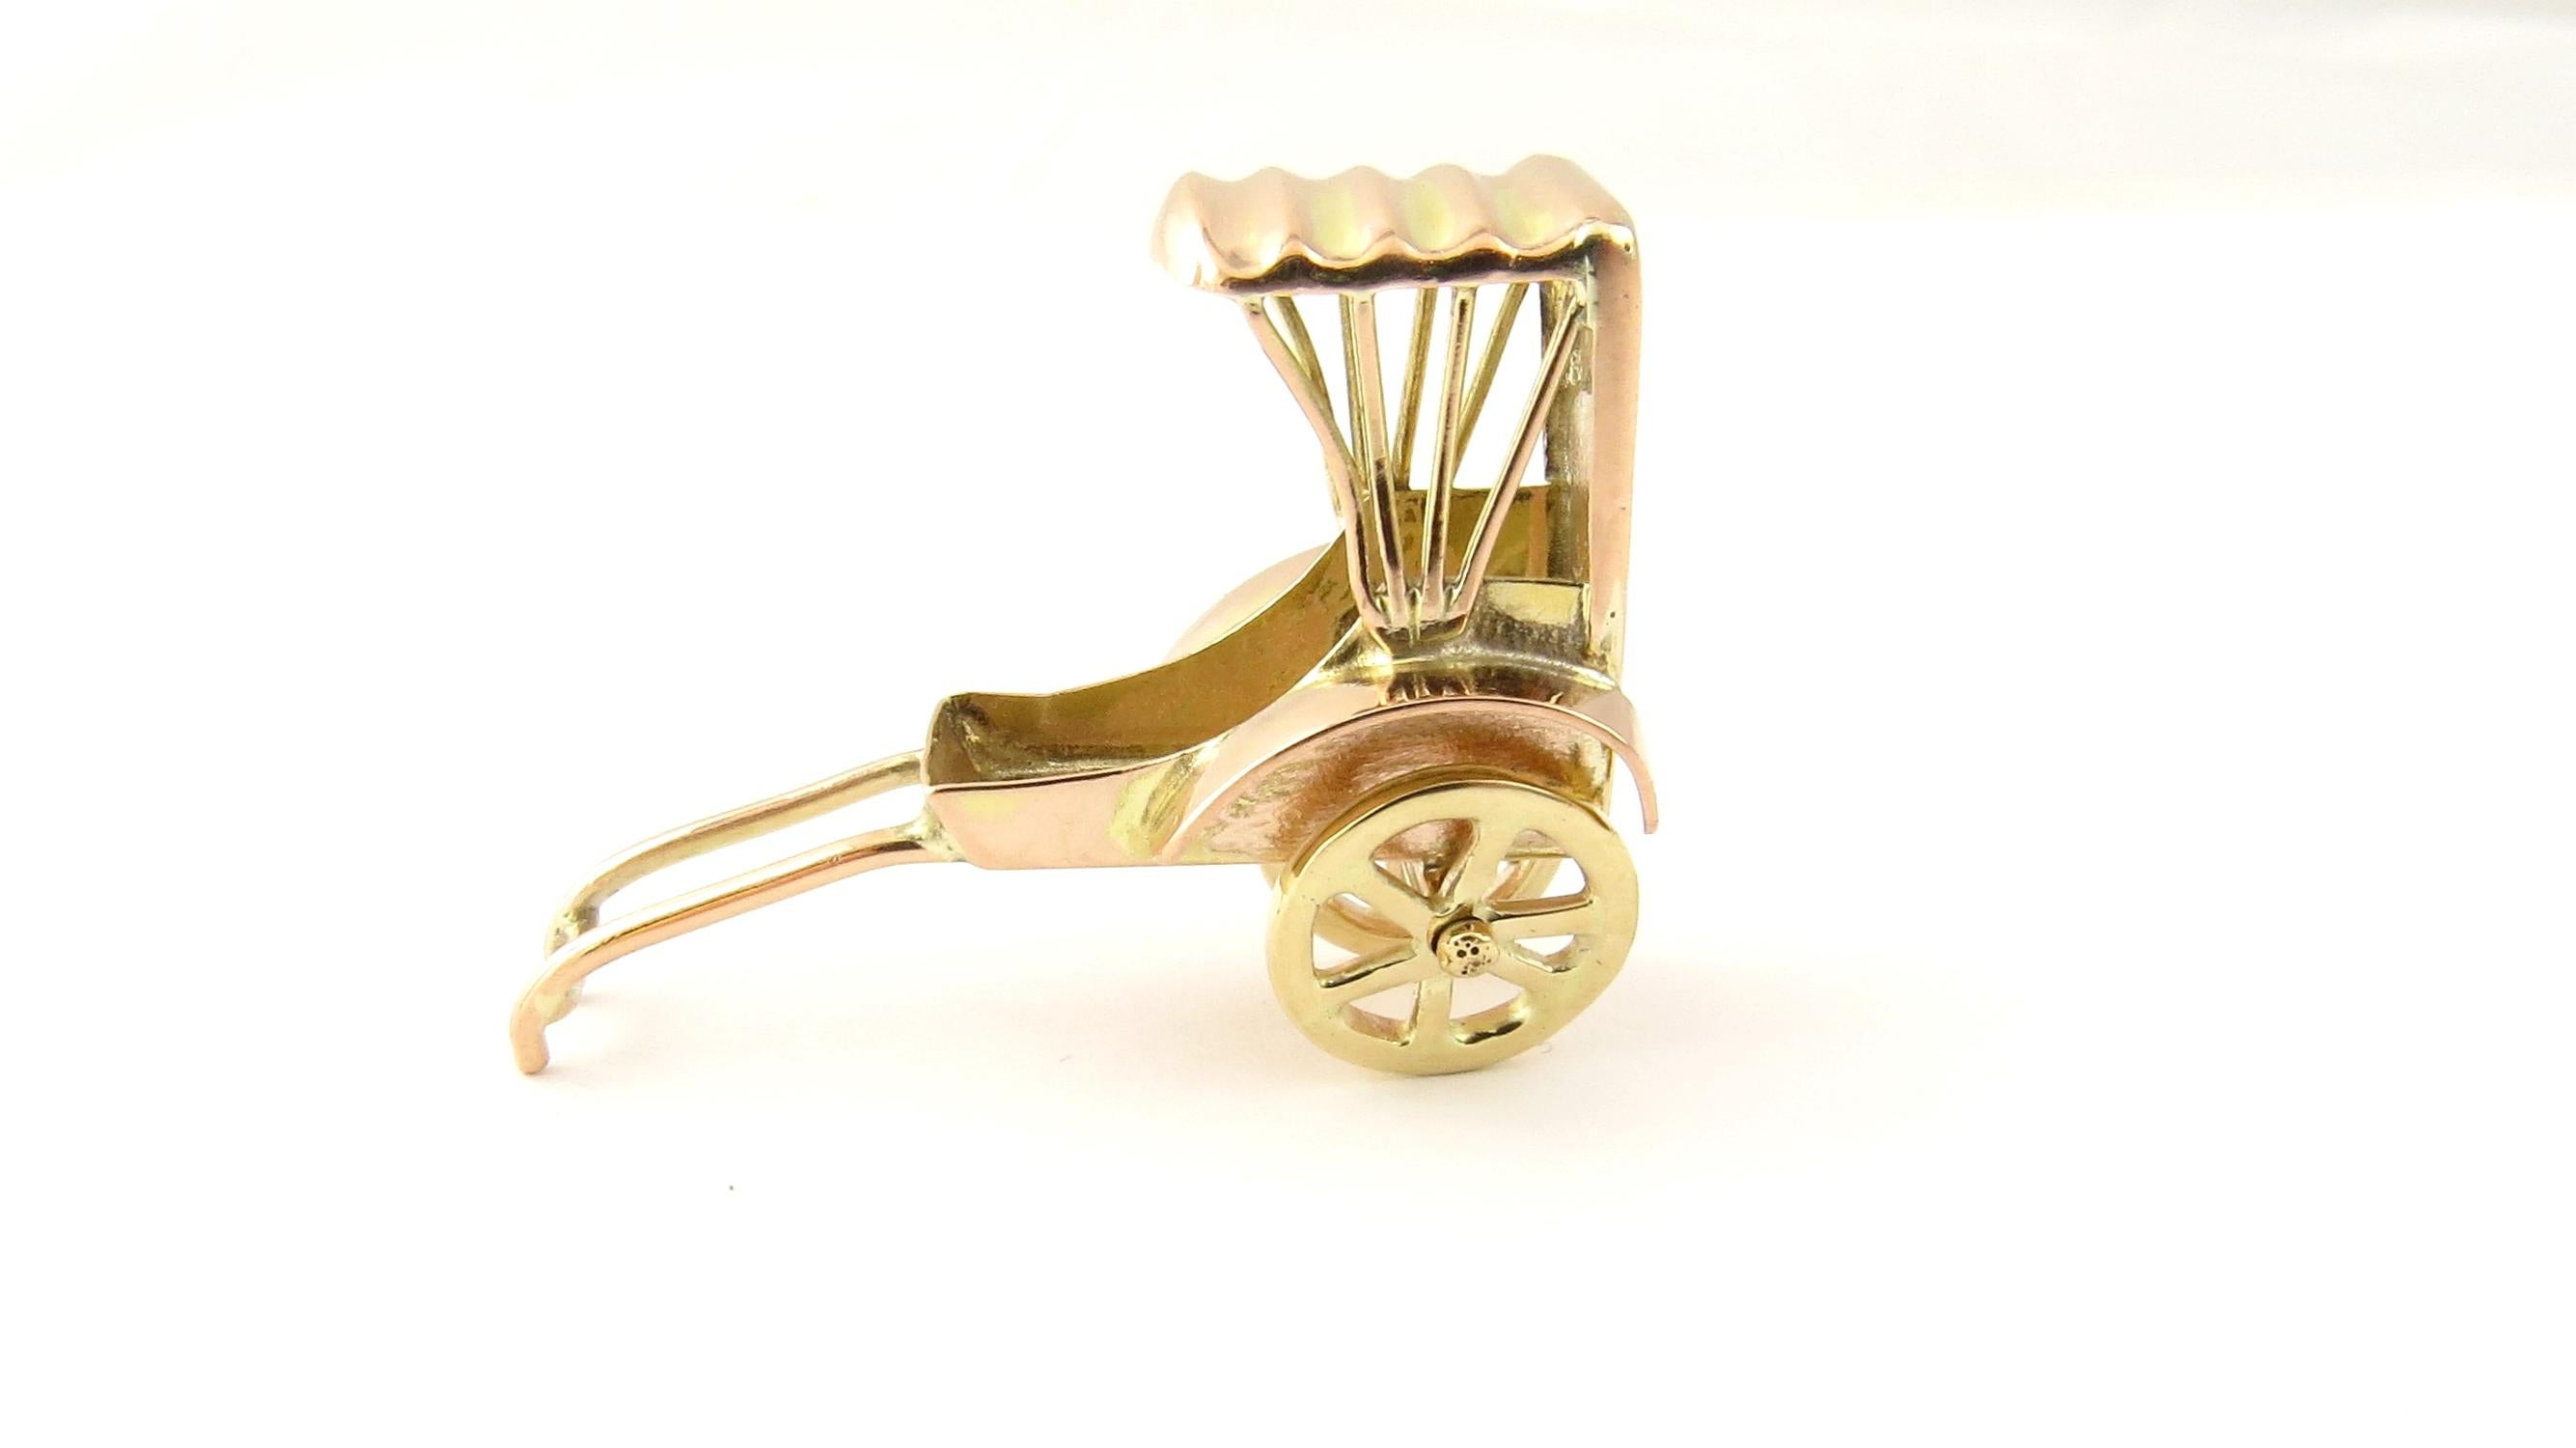 Vintage 14 Karat Yellow Gold Mechanical Rickshaw Charm

Perfect addition to your travel charm collection!

This lovely 3D charm features a miniature rickshaw with moving wheels beautifully detailed in 14K yellow gold.

Size: 27 mm x 33 mm

Weight: